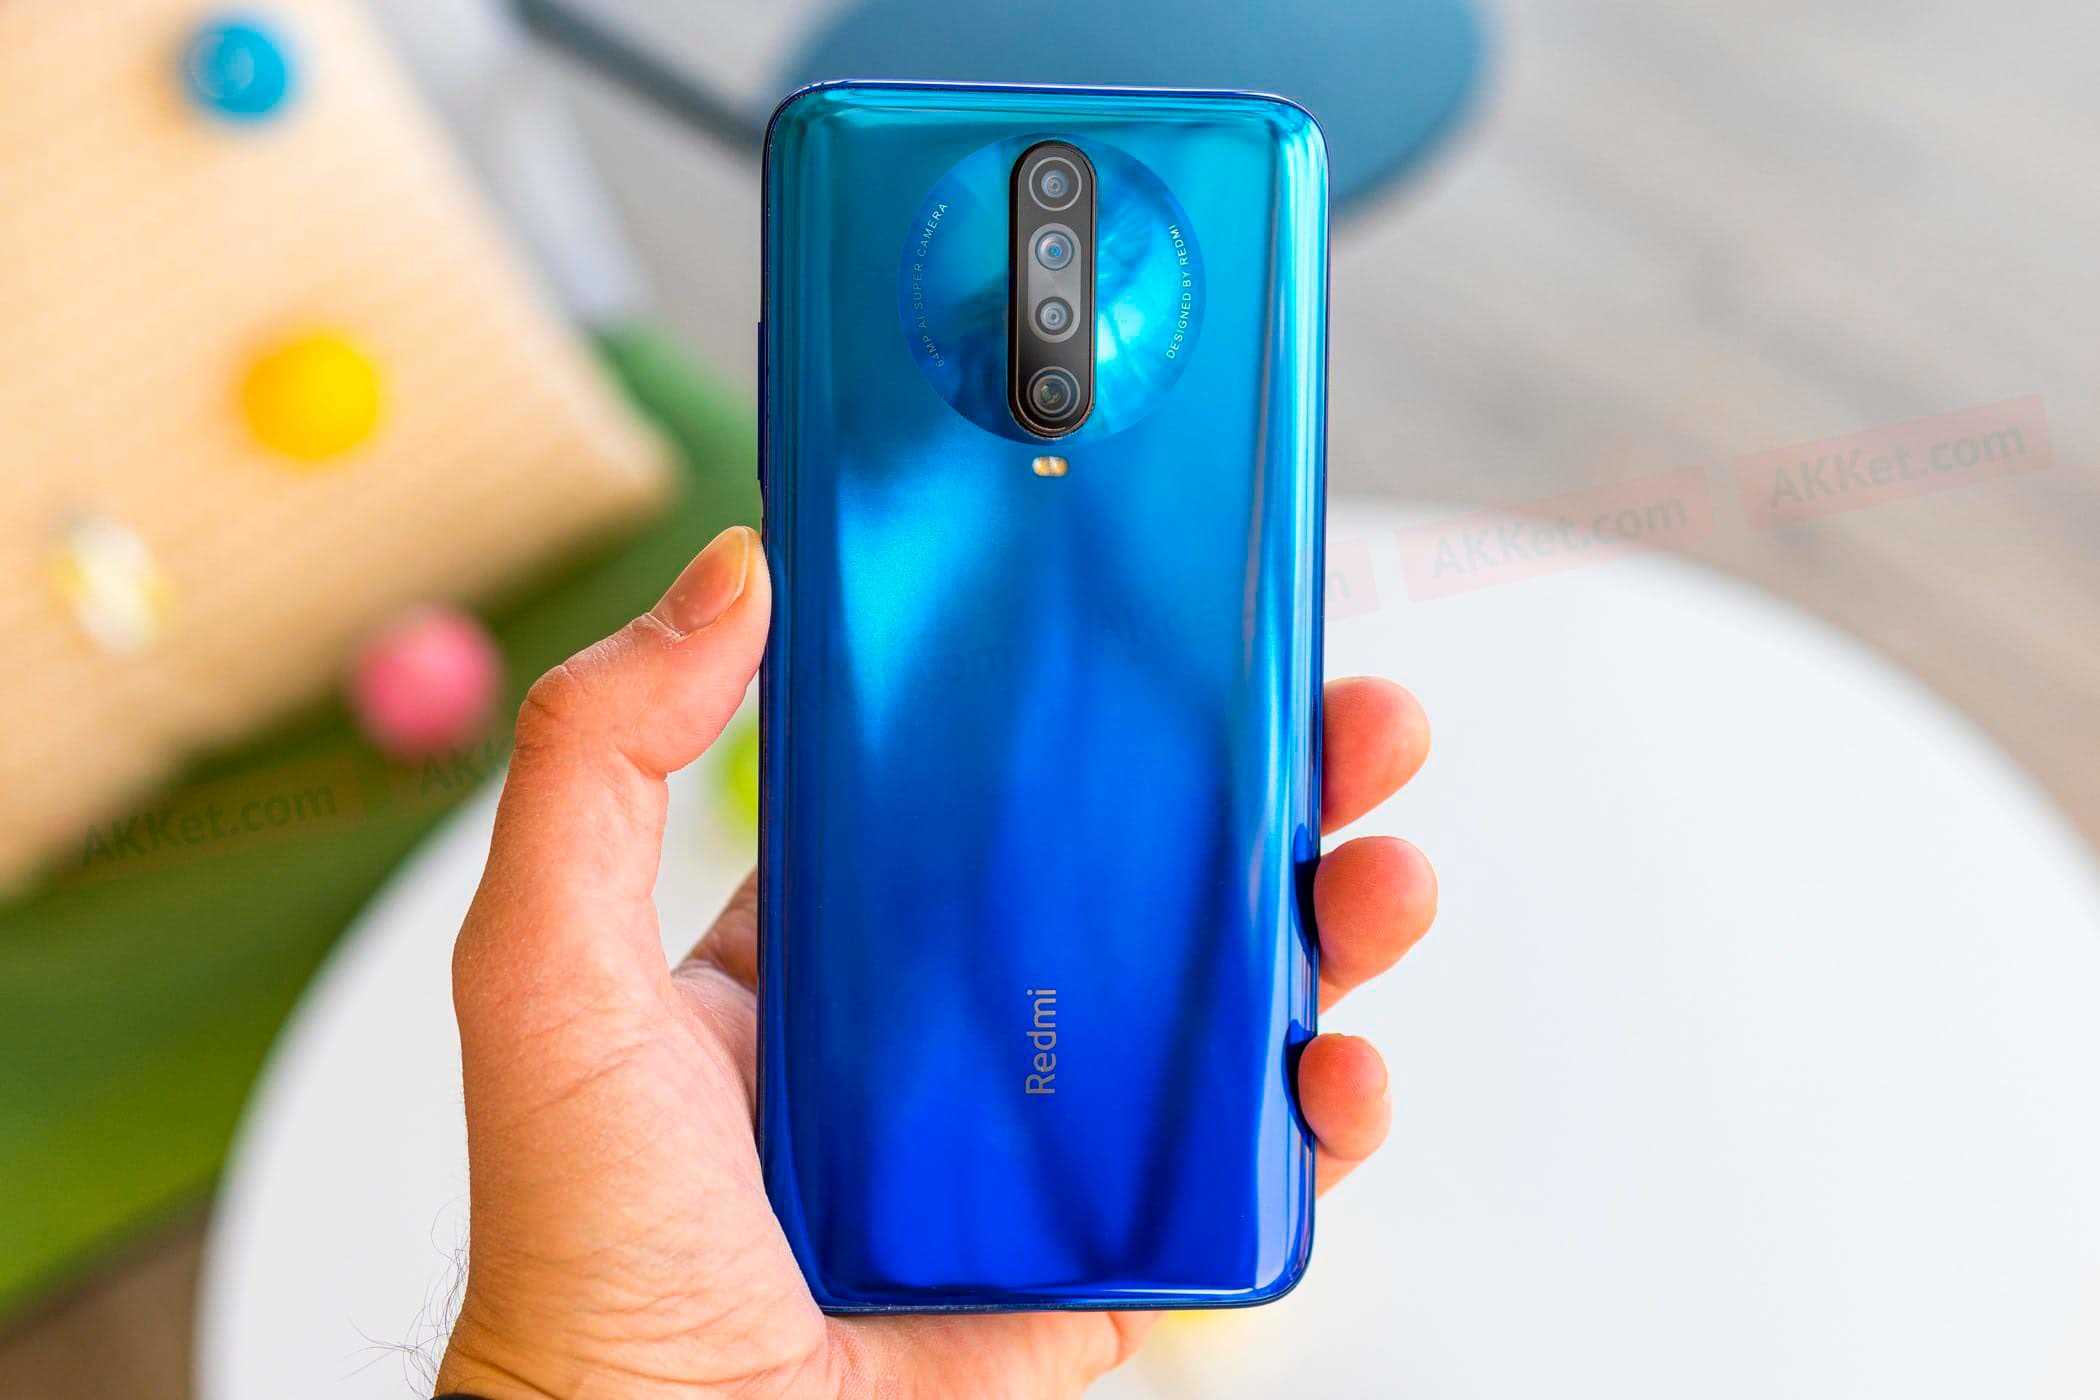 Xiaomi Redmi 9 smartphone review with advantages and disadvantages